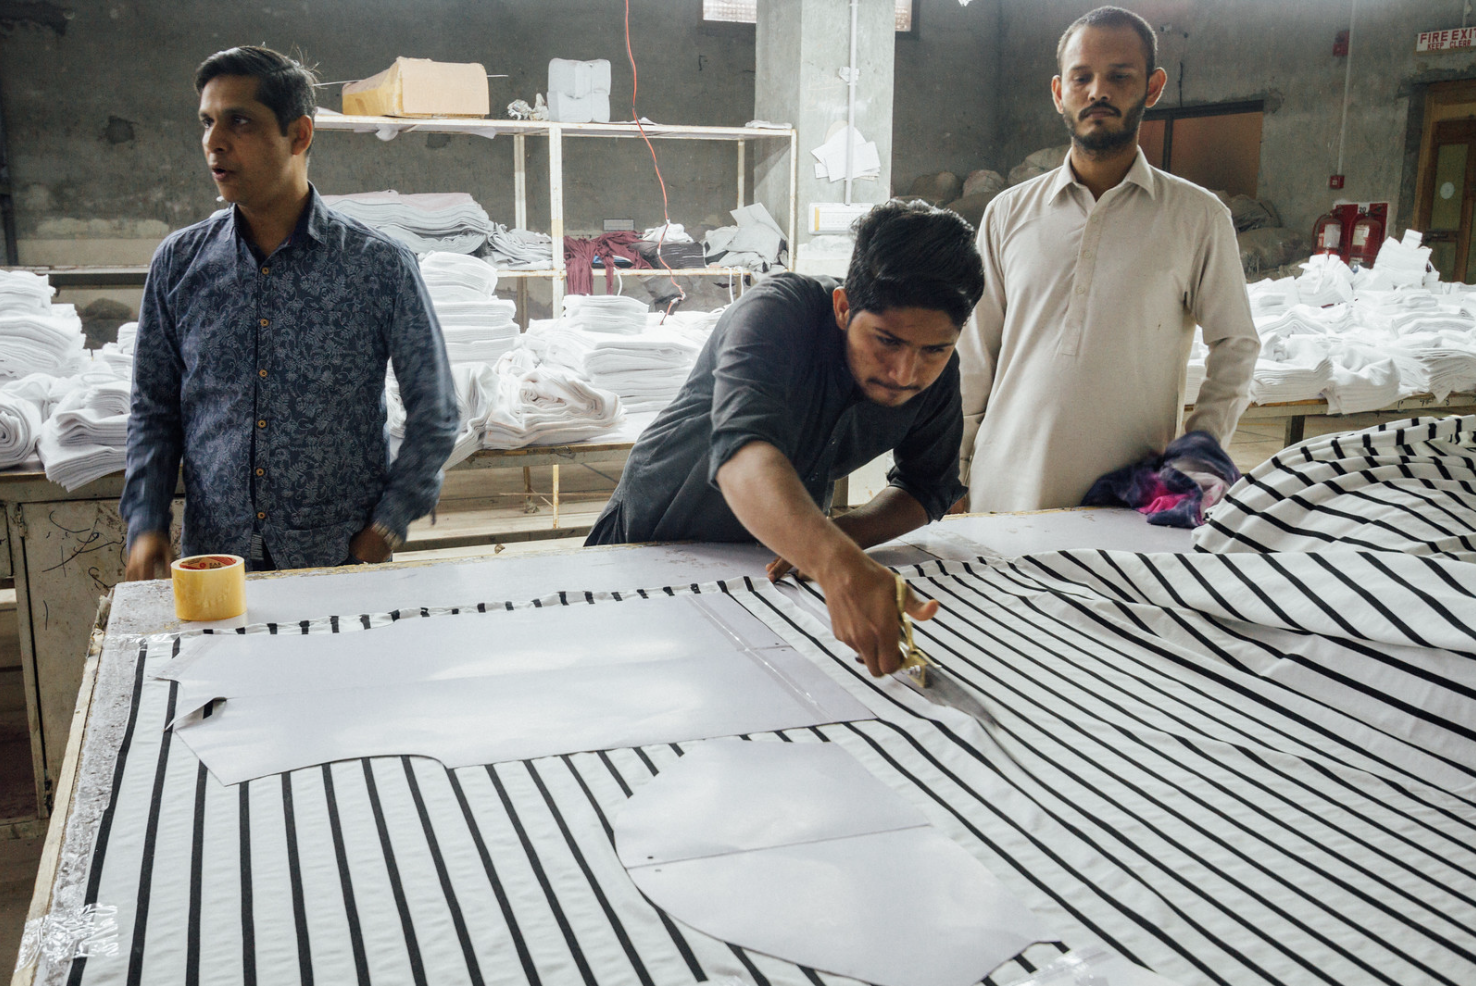 Garment workers cut cloth to pattern sizes at a clothing factory in Faisalabad, Punjab, Pakistan, March 3, 2020 (Photo by Adam Cohn) Creative Commons license via Flickr 